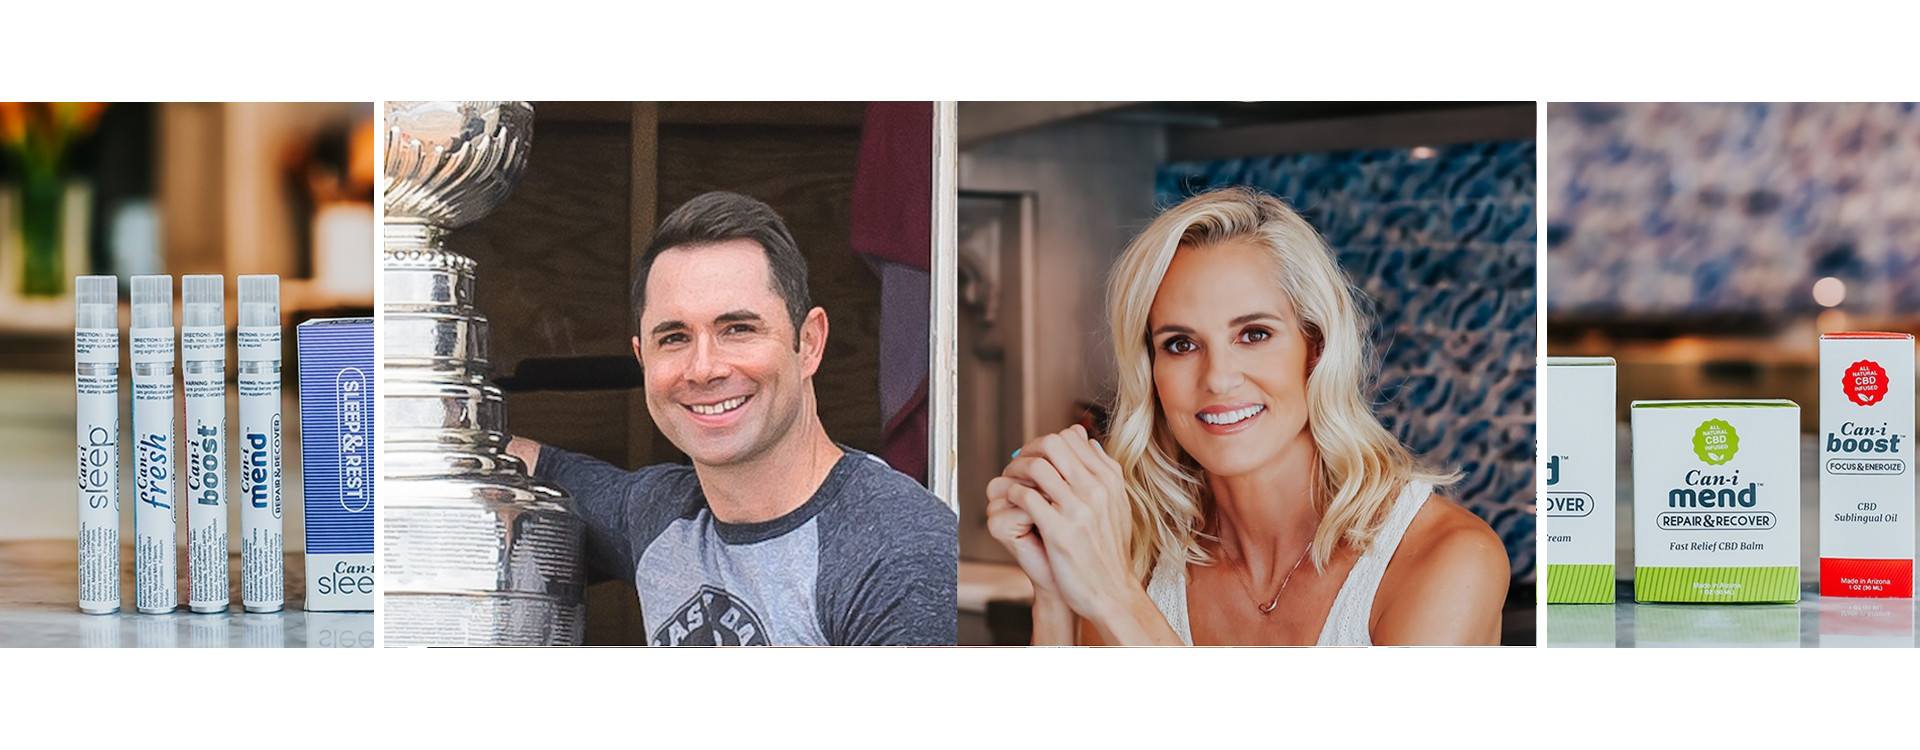 Olympic swimmer Dara Torres and NHL coach Andy O'Brien talk about CBD supplements